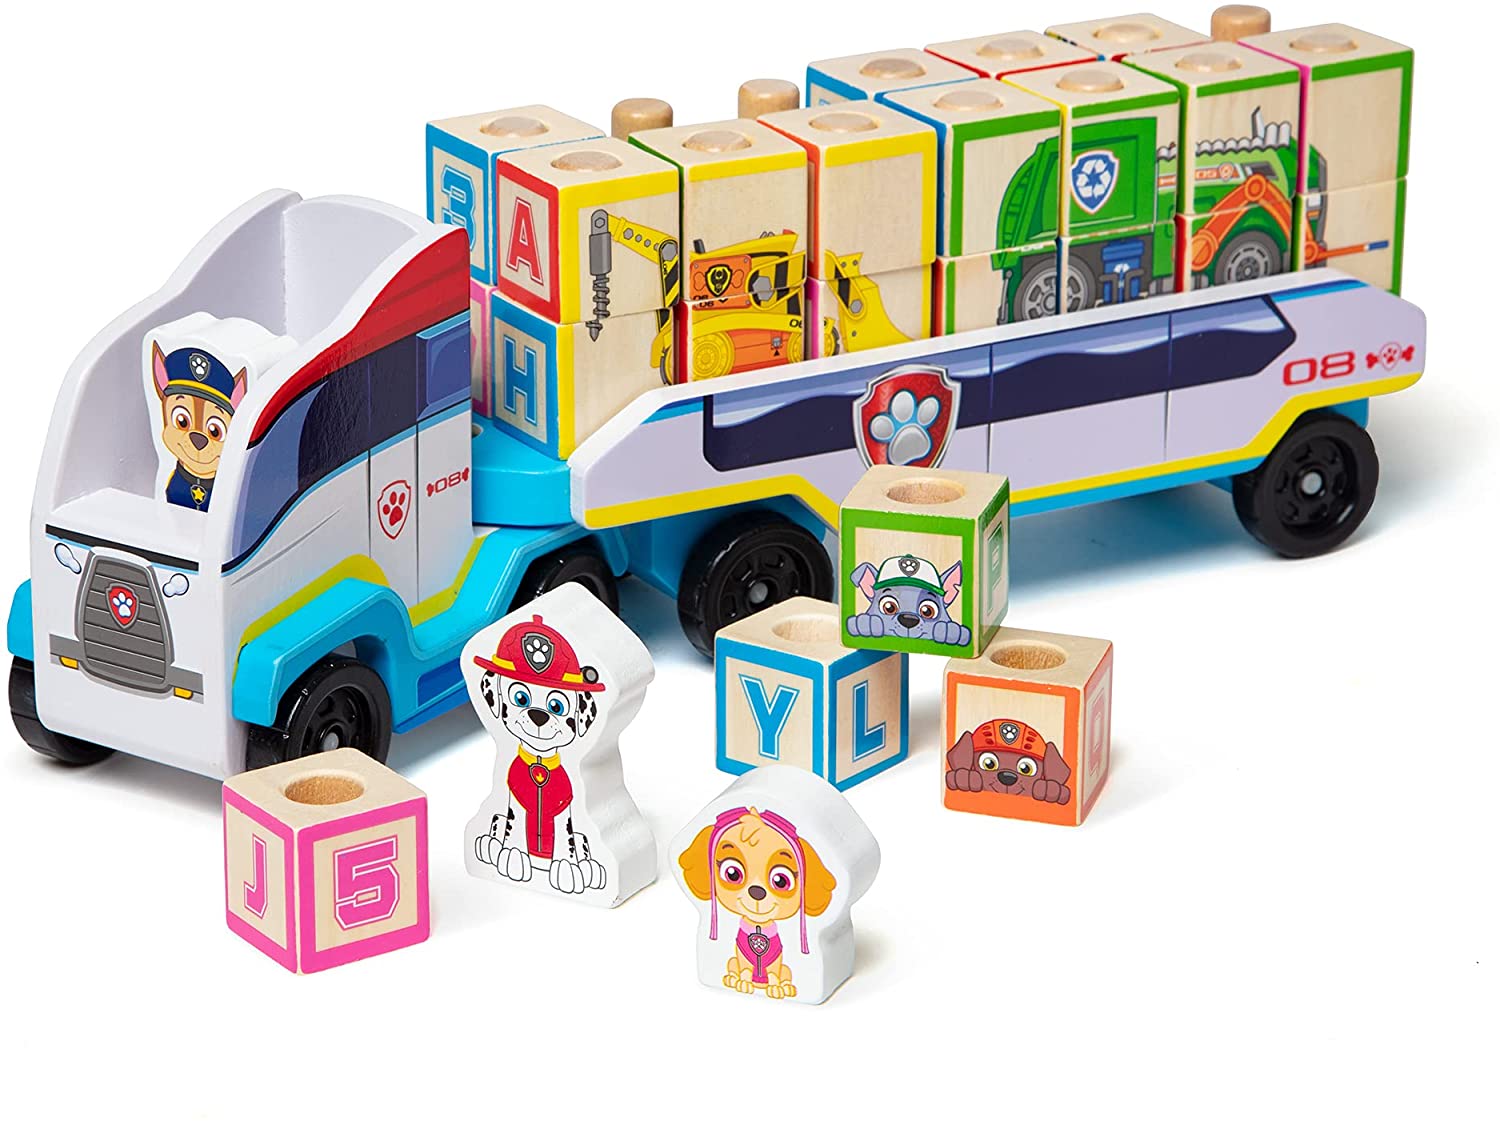 33-Piece Melissa & Doug PAW Patrol Wooden ABC Block Truck $16.19 + Free Shipping w/ Prime or on orders $25+